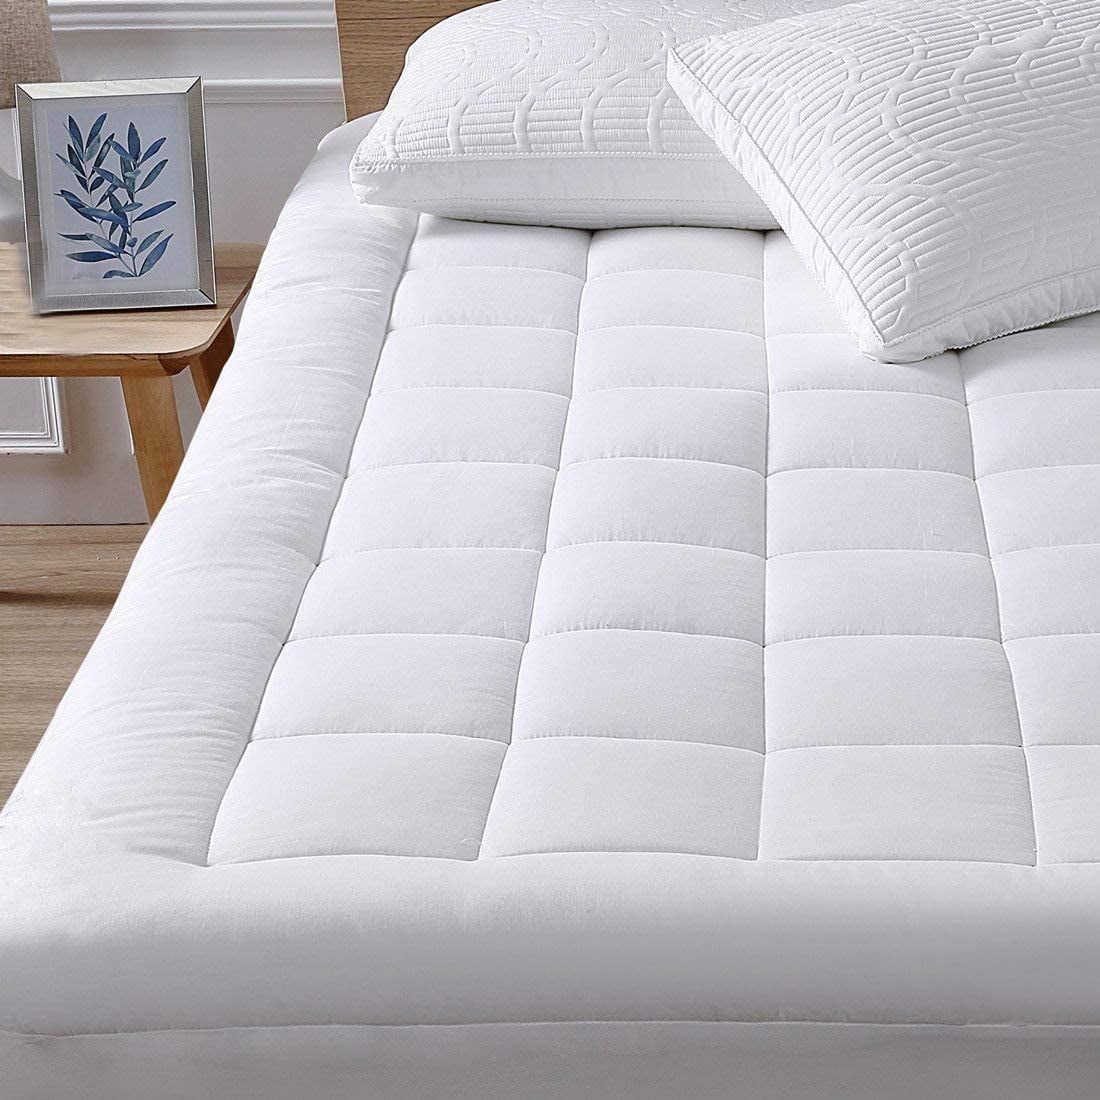 Hs71 Mattress Pad Topper Under Bed 70% Down 30% FEATHERS 4300g 140x200 cm 